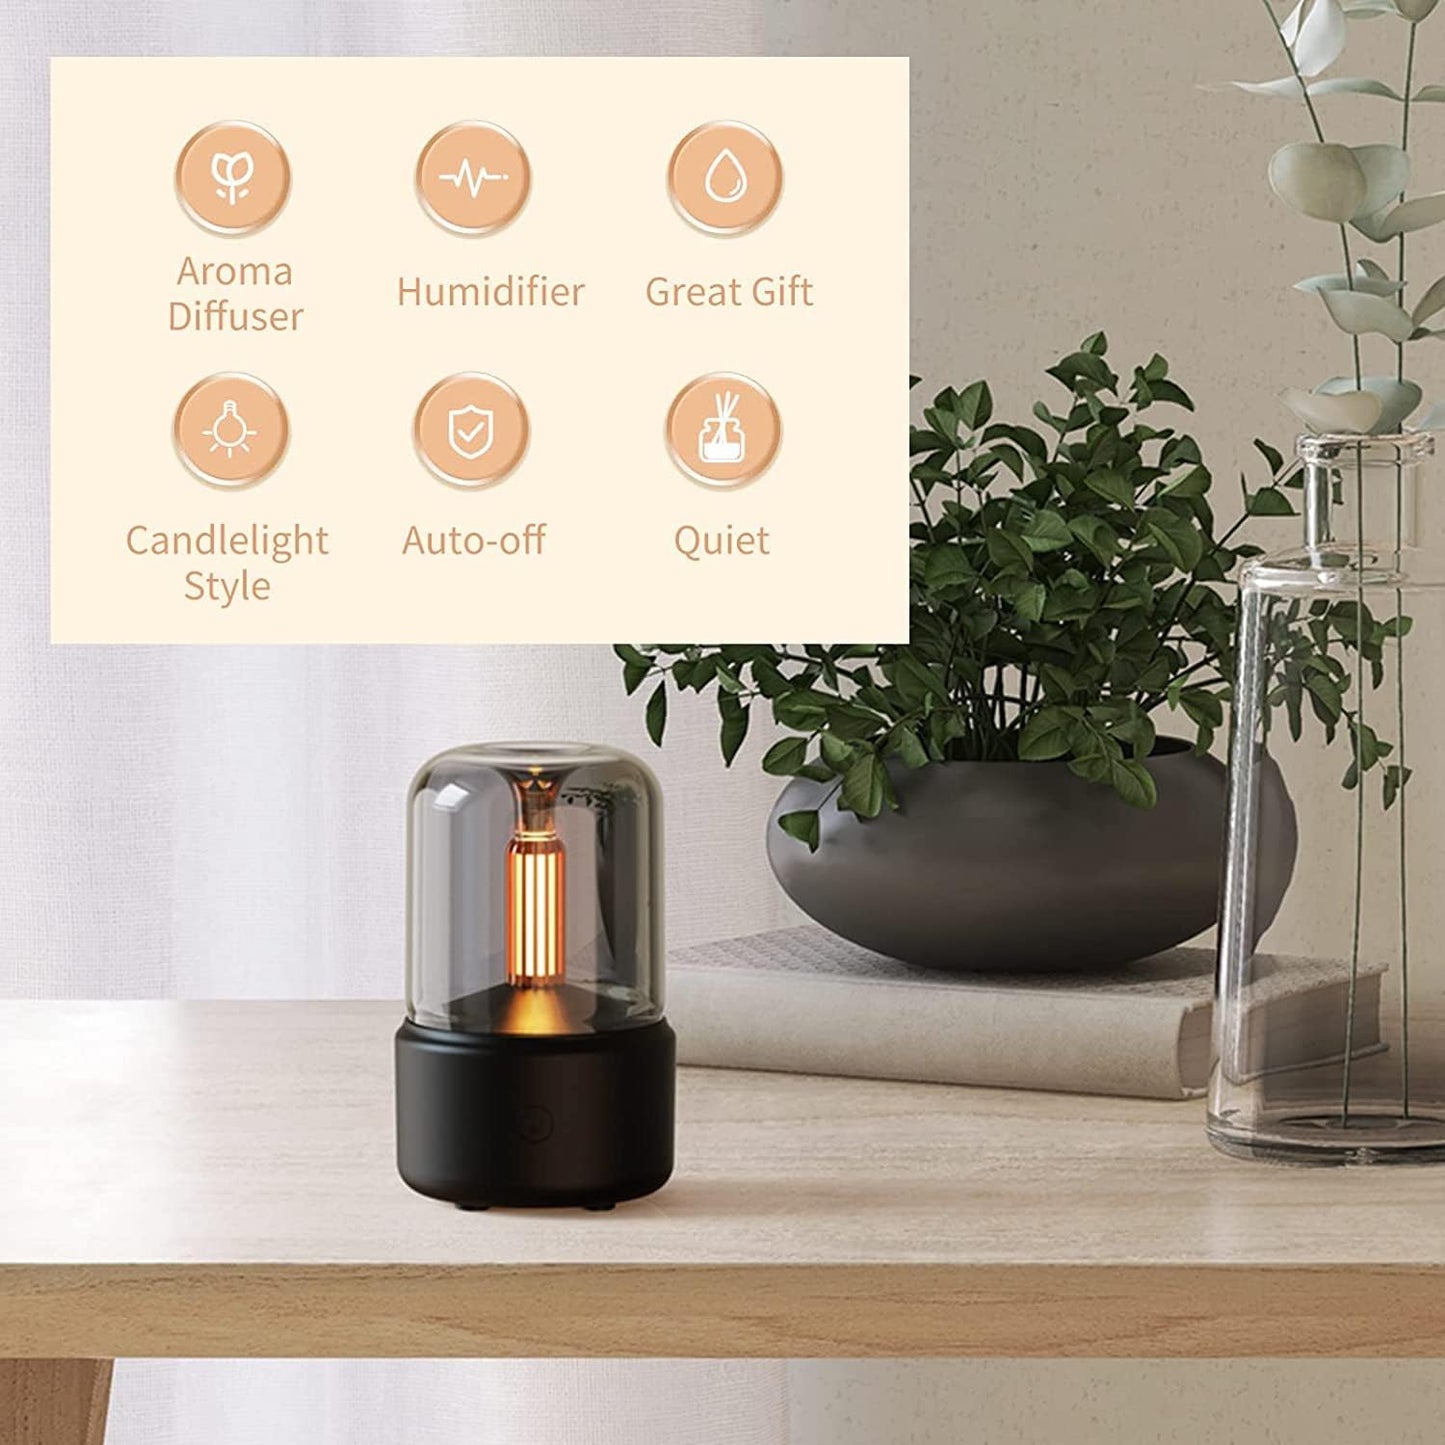 AuraDecor Candlelight Style Diffuser 120mL Auto-Shut Off Mist Humidifier Warm White Night Light Quiet Essential Oil Diffuser Cool Mist Air Humidifier for Desktop Home Office Bedroom Car